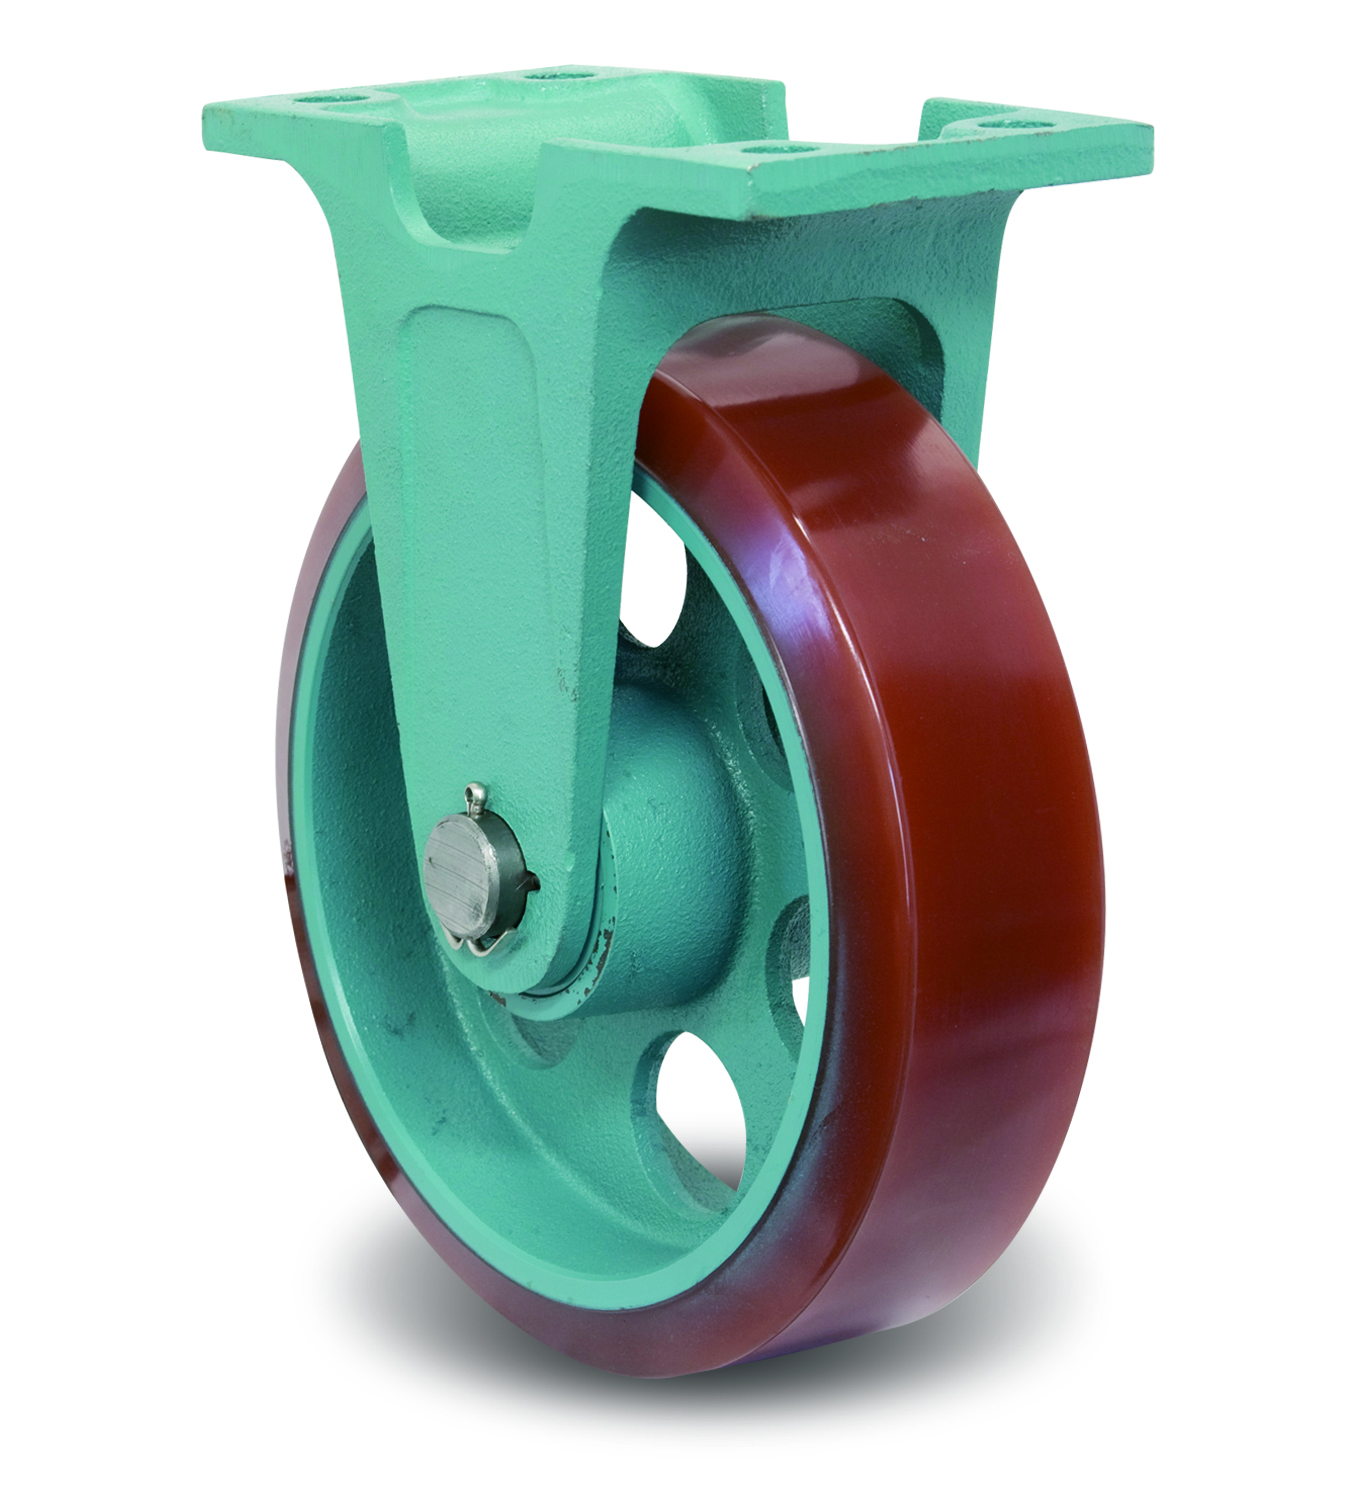 Ductile Caster - Wide - Fixed - MG-W with Metal Fittings - EU/MG-W EUMG-W150X50